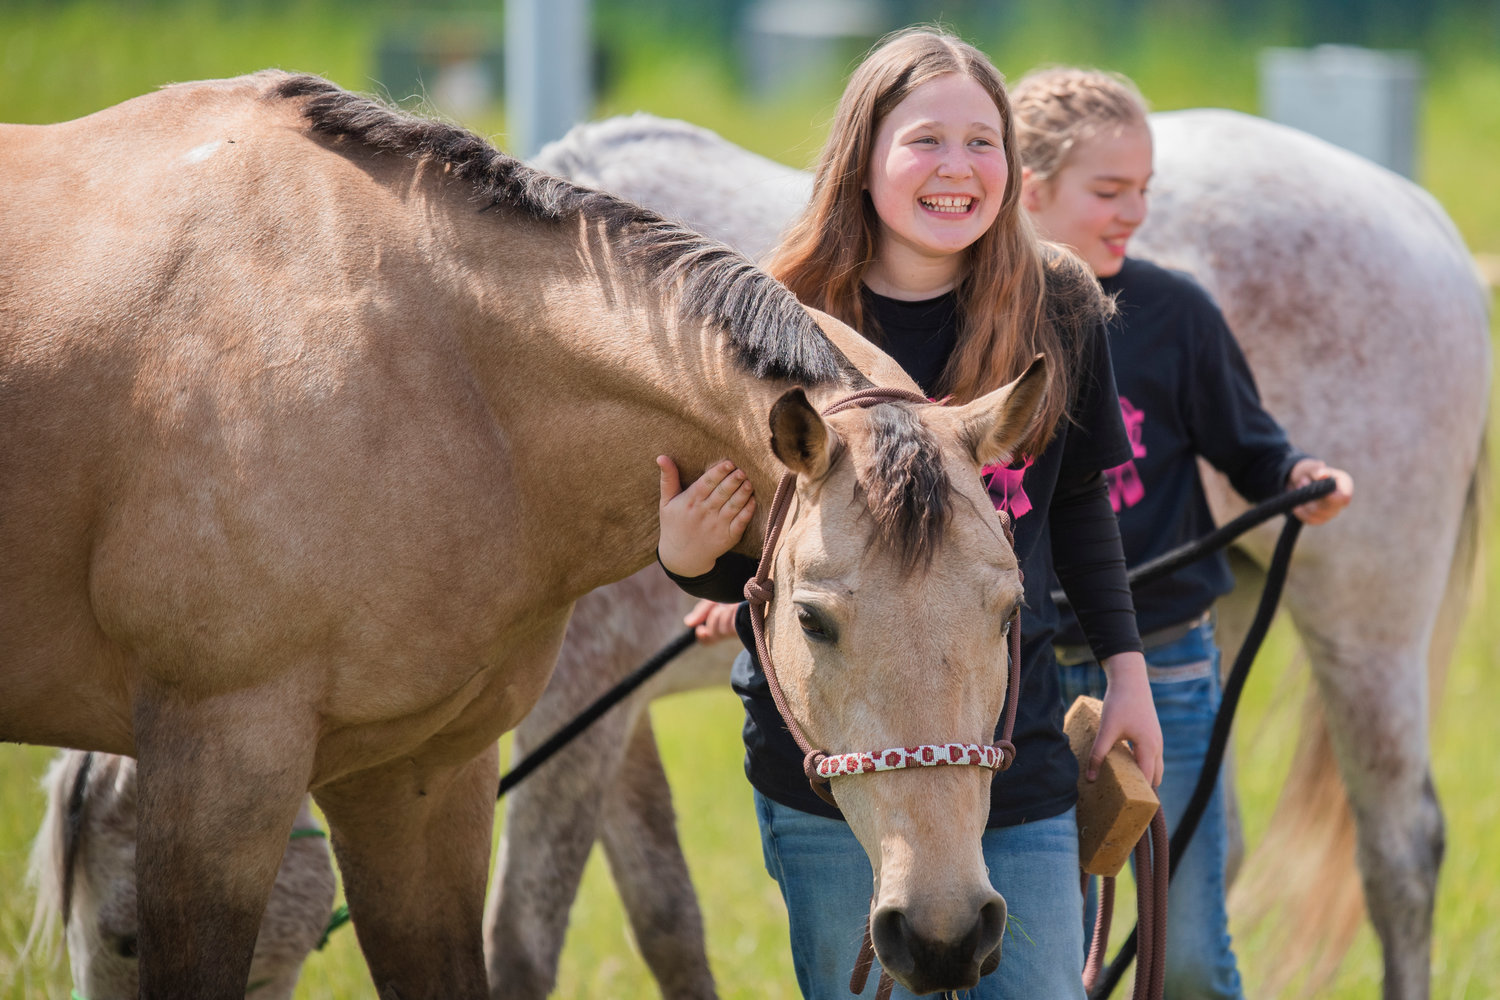 Rikki Workman smiles as she pets and cleans her horse, Butter, at the Southwest Washington Fairgrounds alongside Bristol Osborn and her horse Annie while describing the arena as a “swamp” on Sunday. Friday marked the return of the Spring Youth Fair, which was canceled the two previous years due to COVID-19. The Spring Youth Fair is essentially a smaller version of the Southwest Washington Fair that focuses on children. Look for information on next year’s run online at springyouthfair.org.